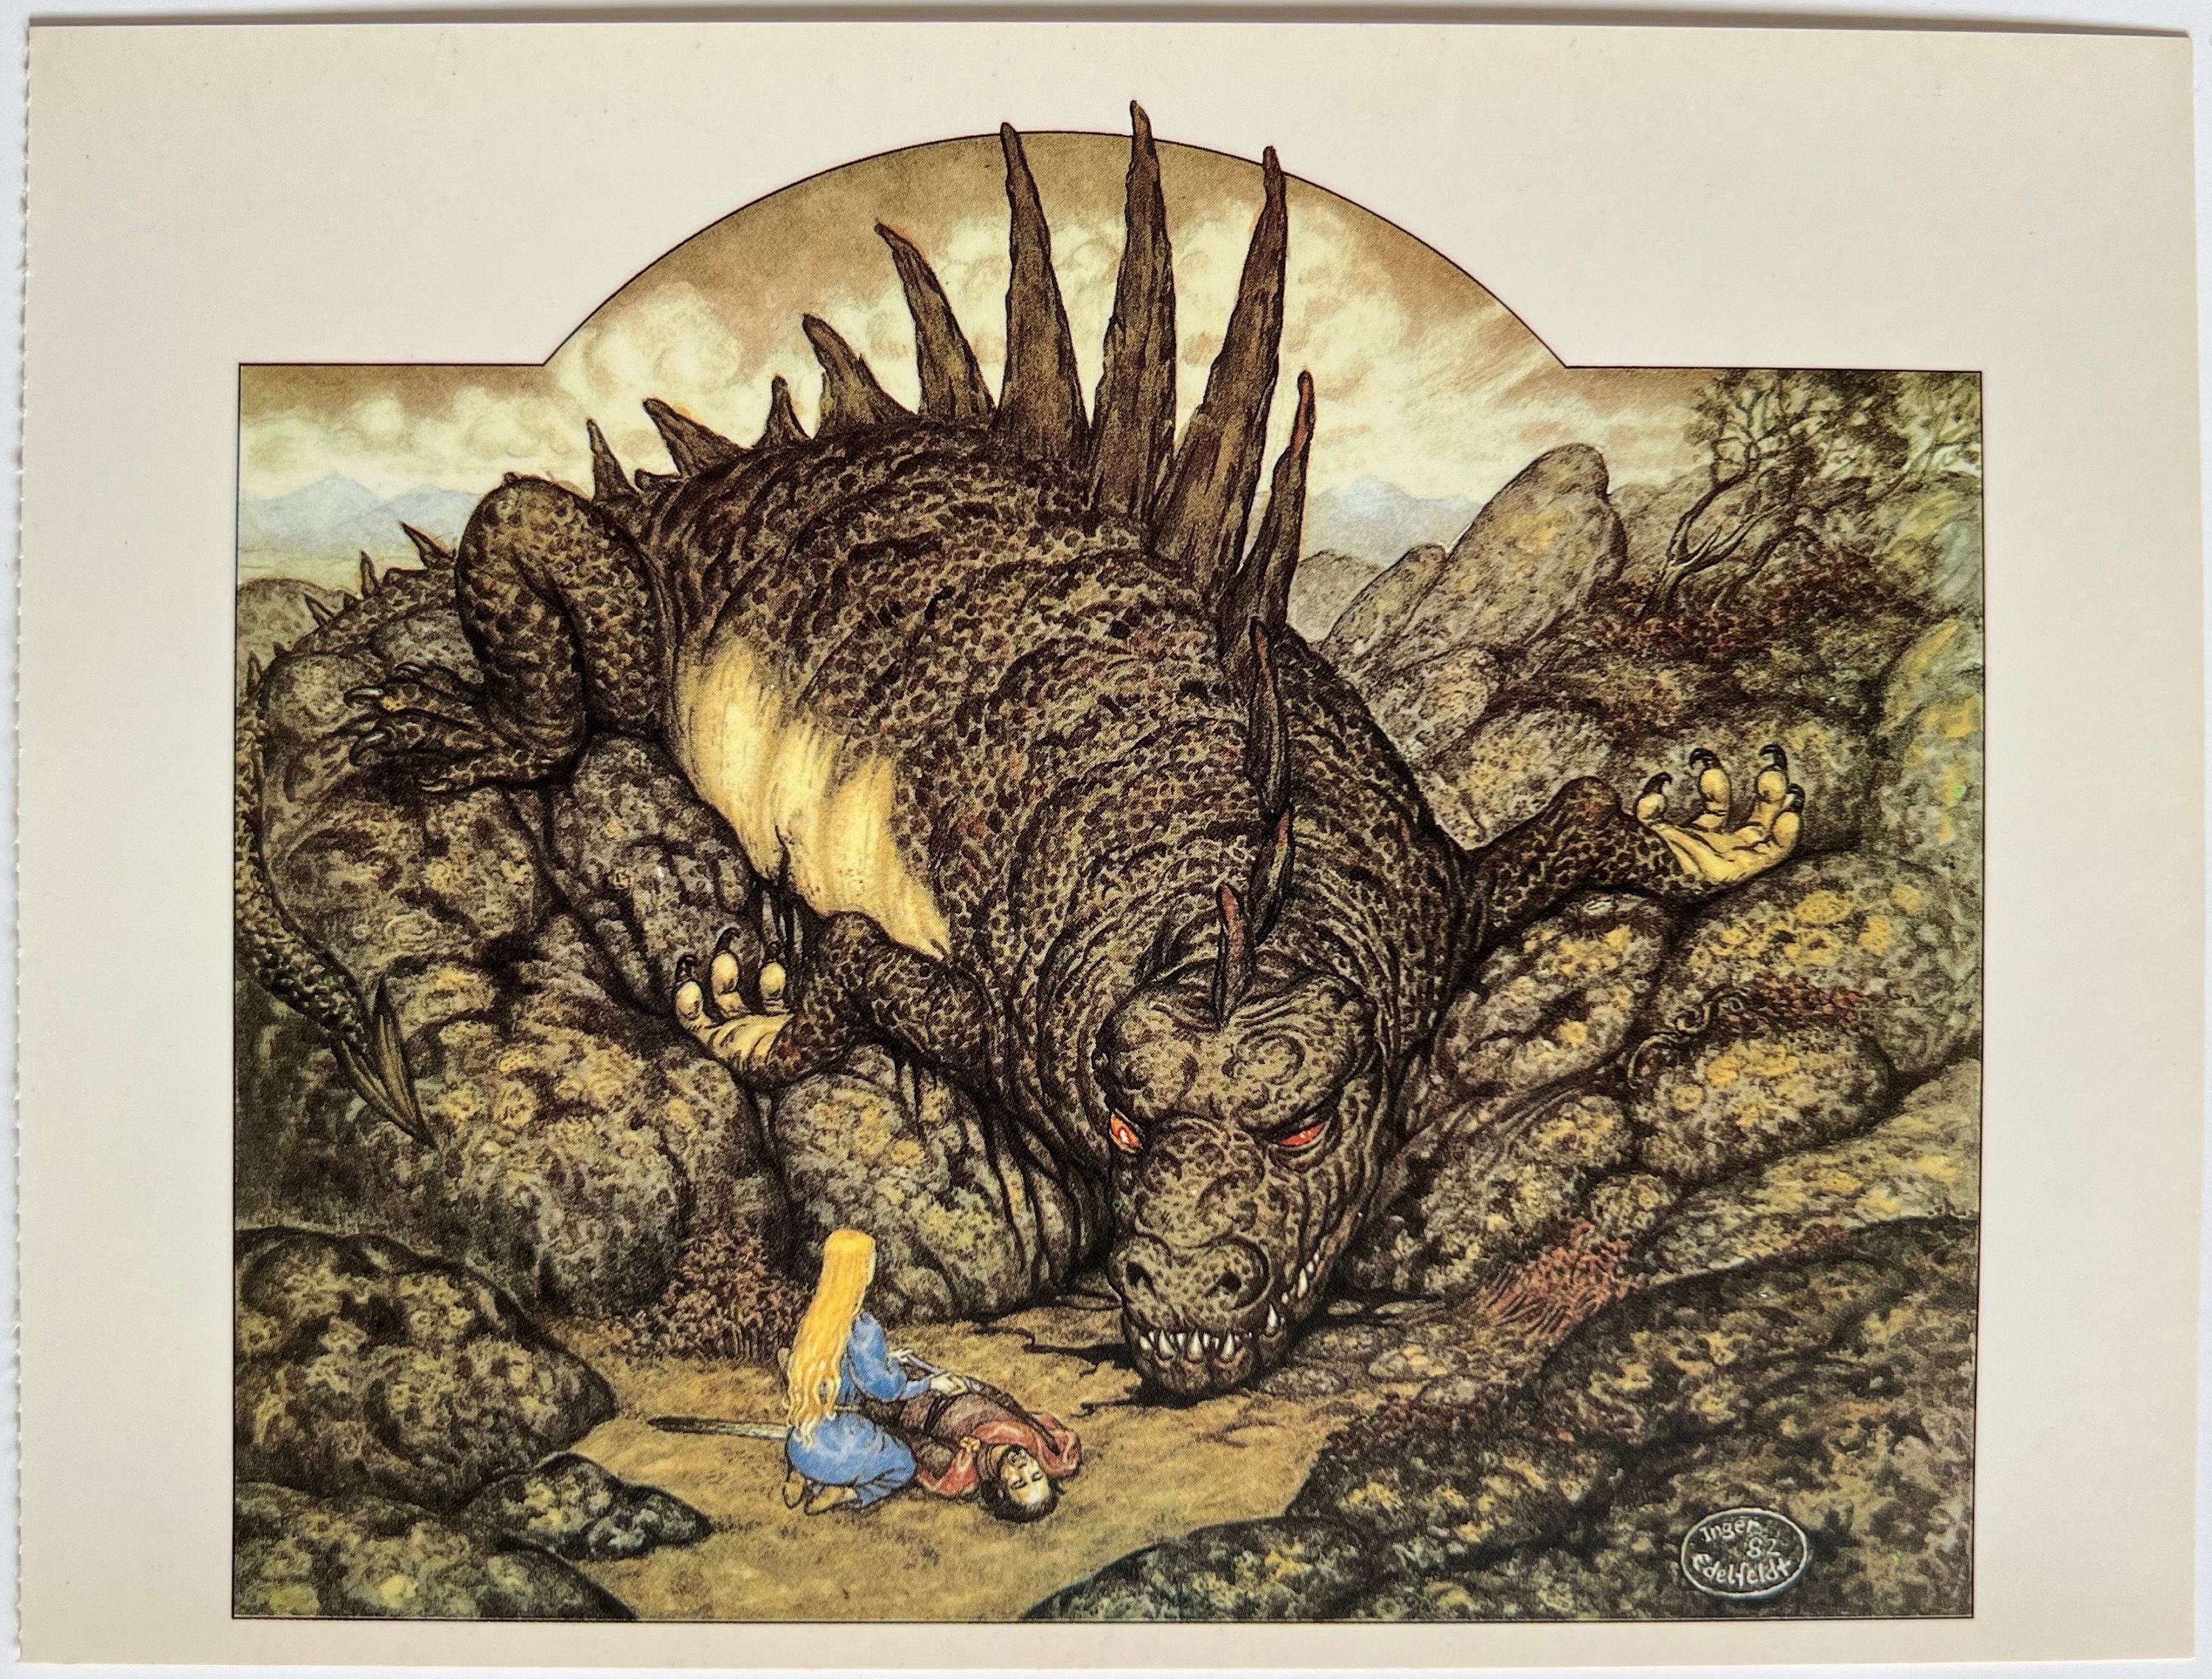 The Death of Glaurung